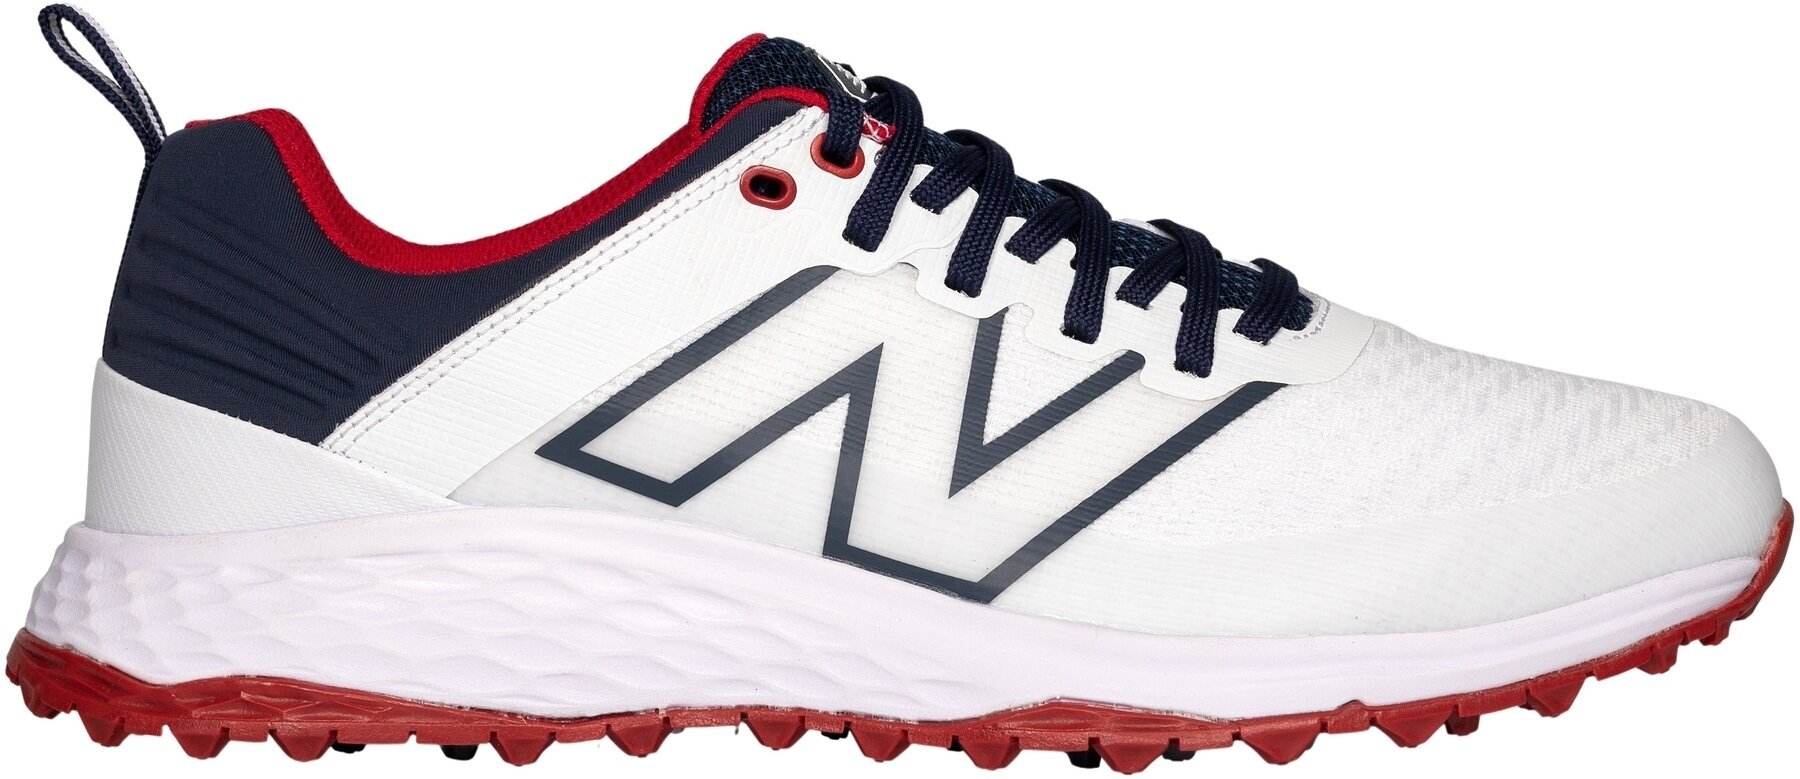 Men's golf shoes New Balance Contend Mens Golf Shoes White/Navy 42,5